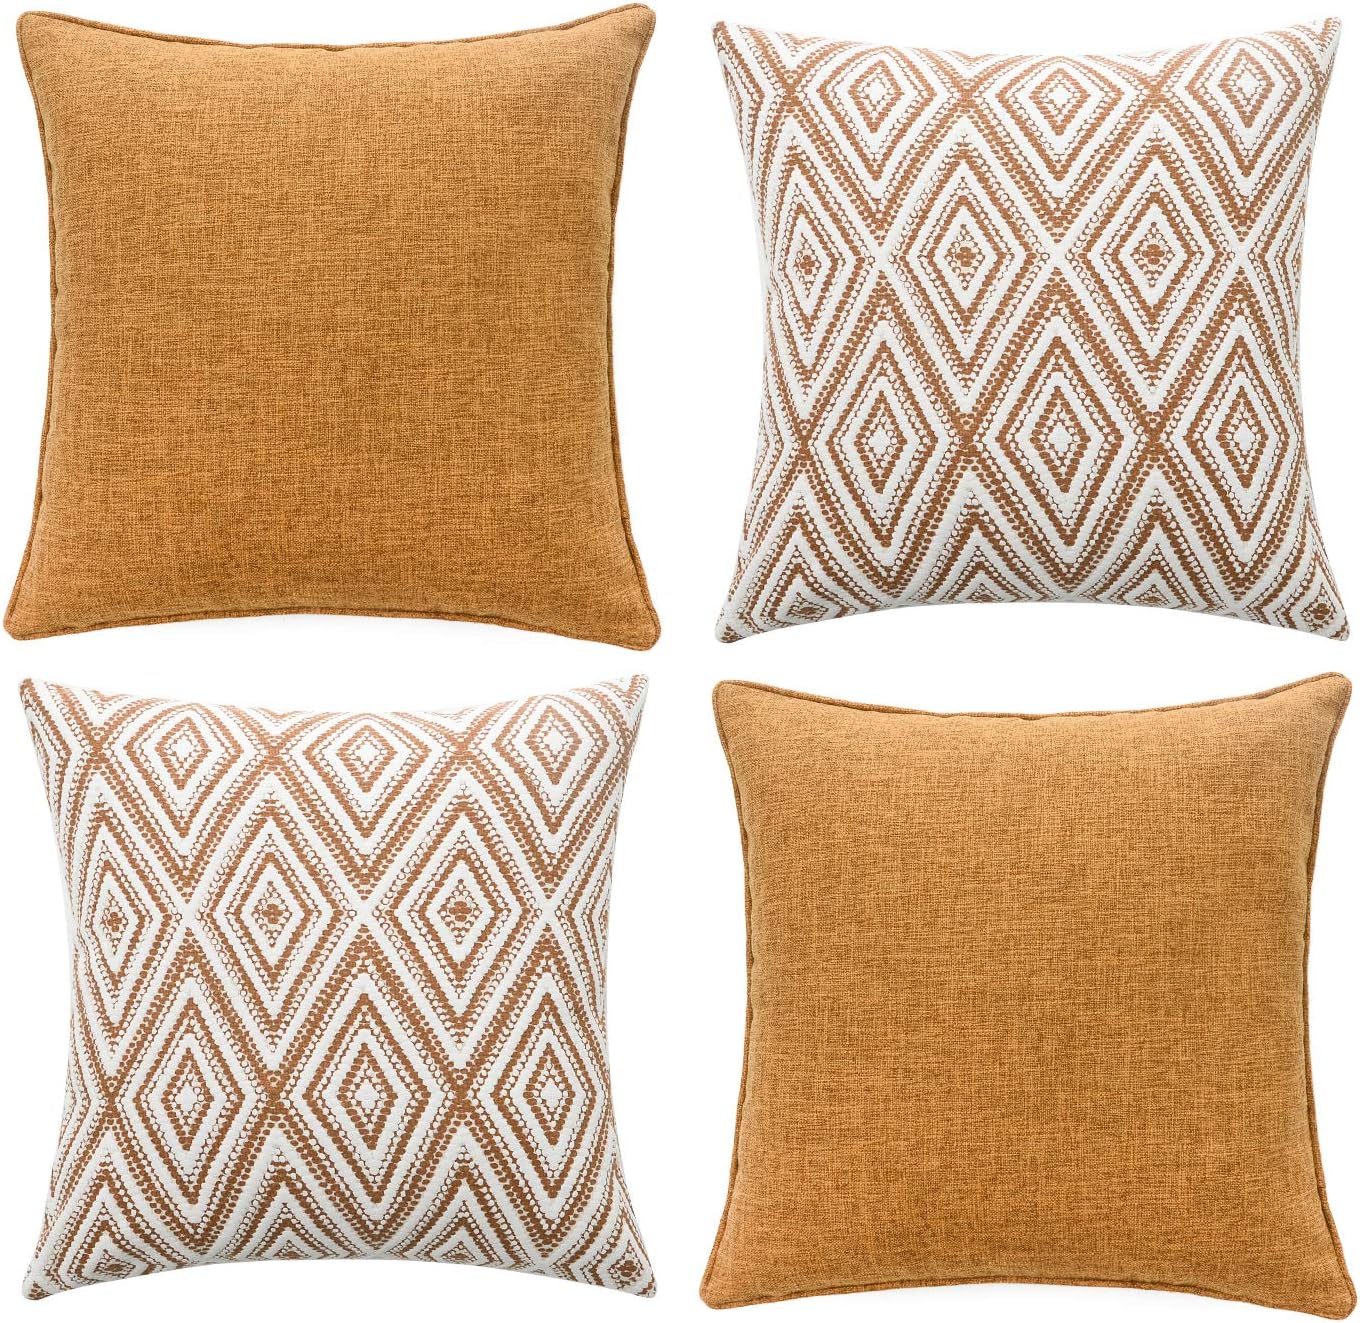 HPUK Decorative Throw Pillow Covers Set of 4 Geometric Design Linen Cushion Cover for Couch Sofa Living Room, 18x18 inches, Golden Brown